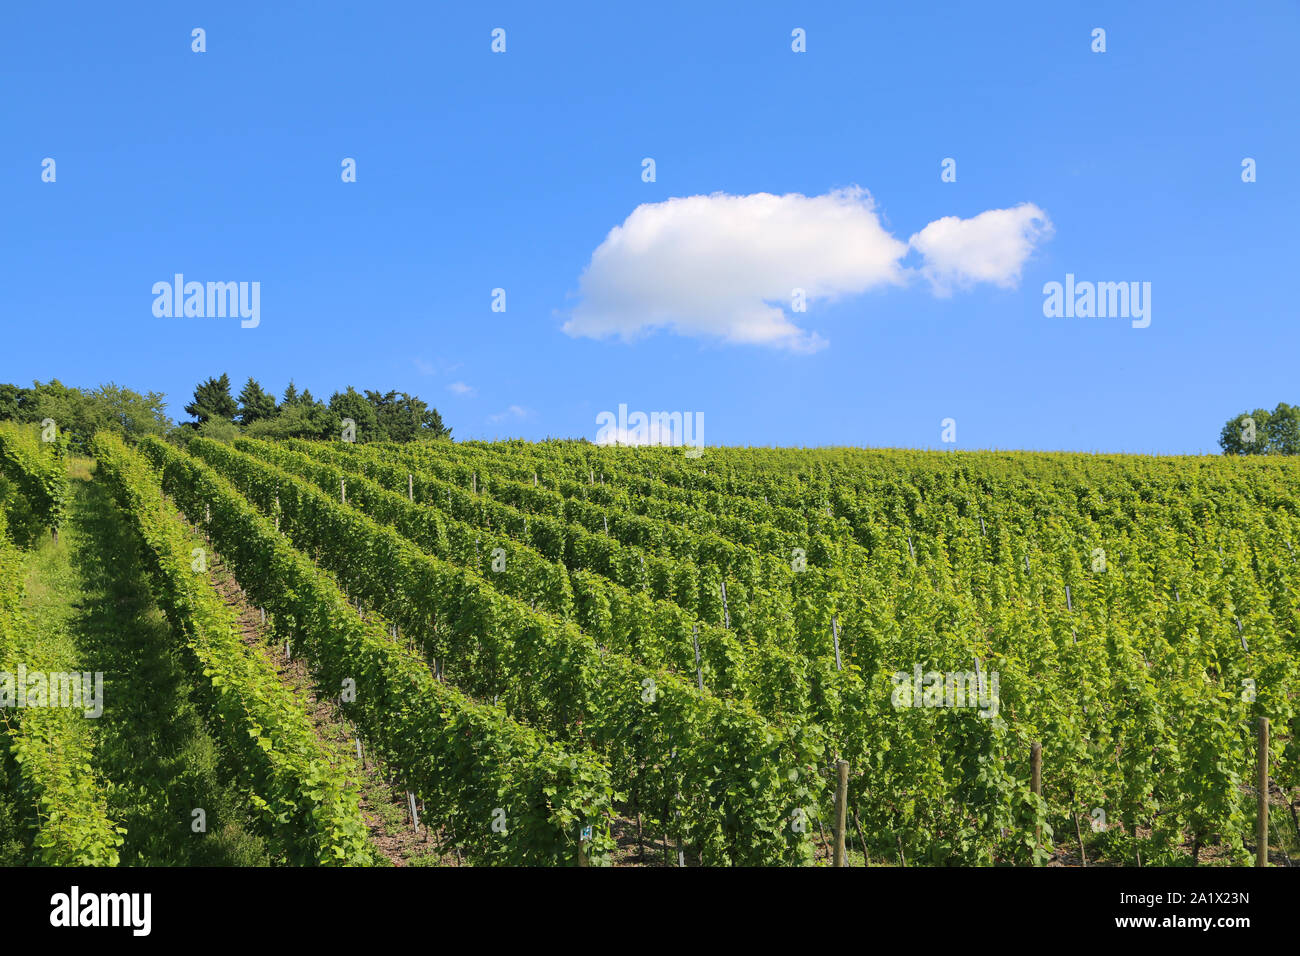 blue sky with single cloud over vineyard in germany Stock Photo